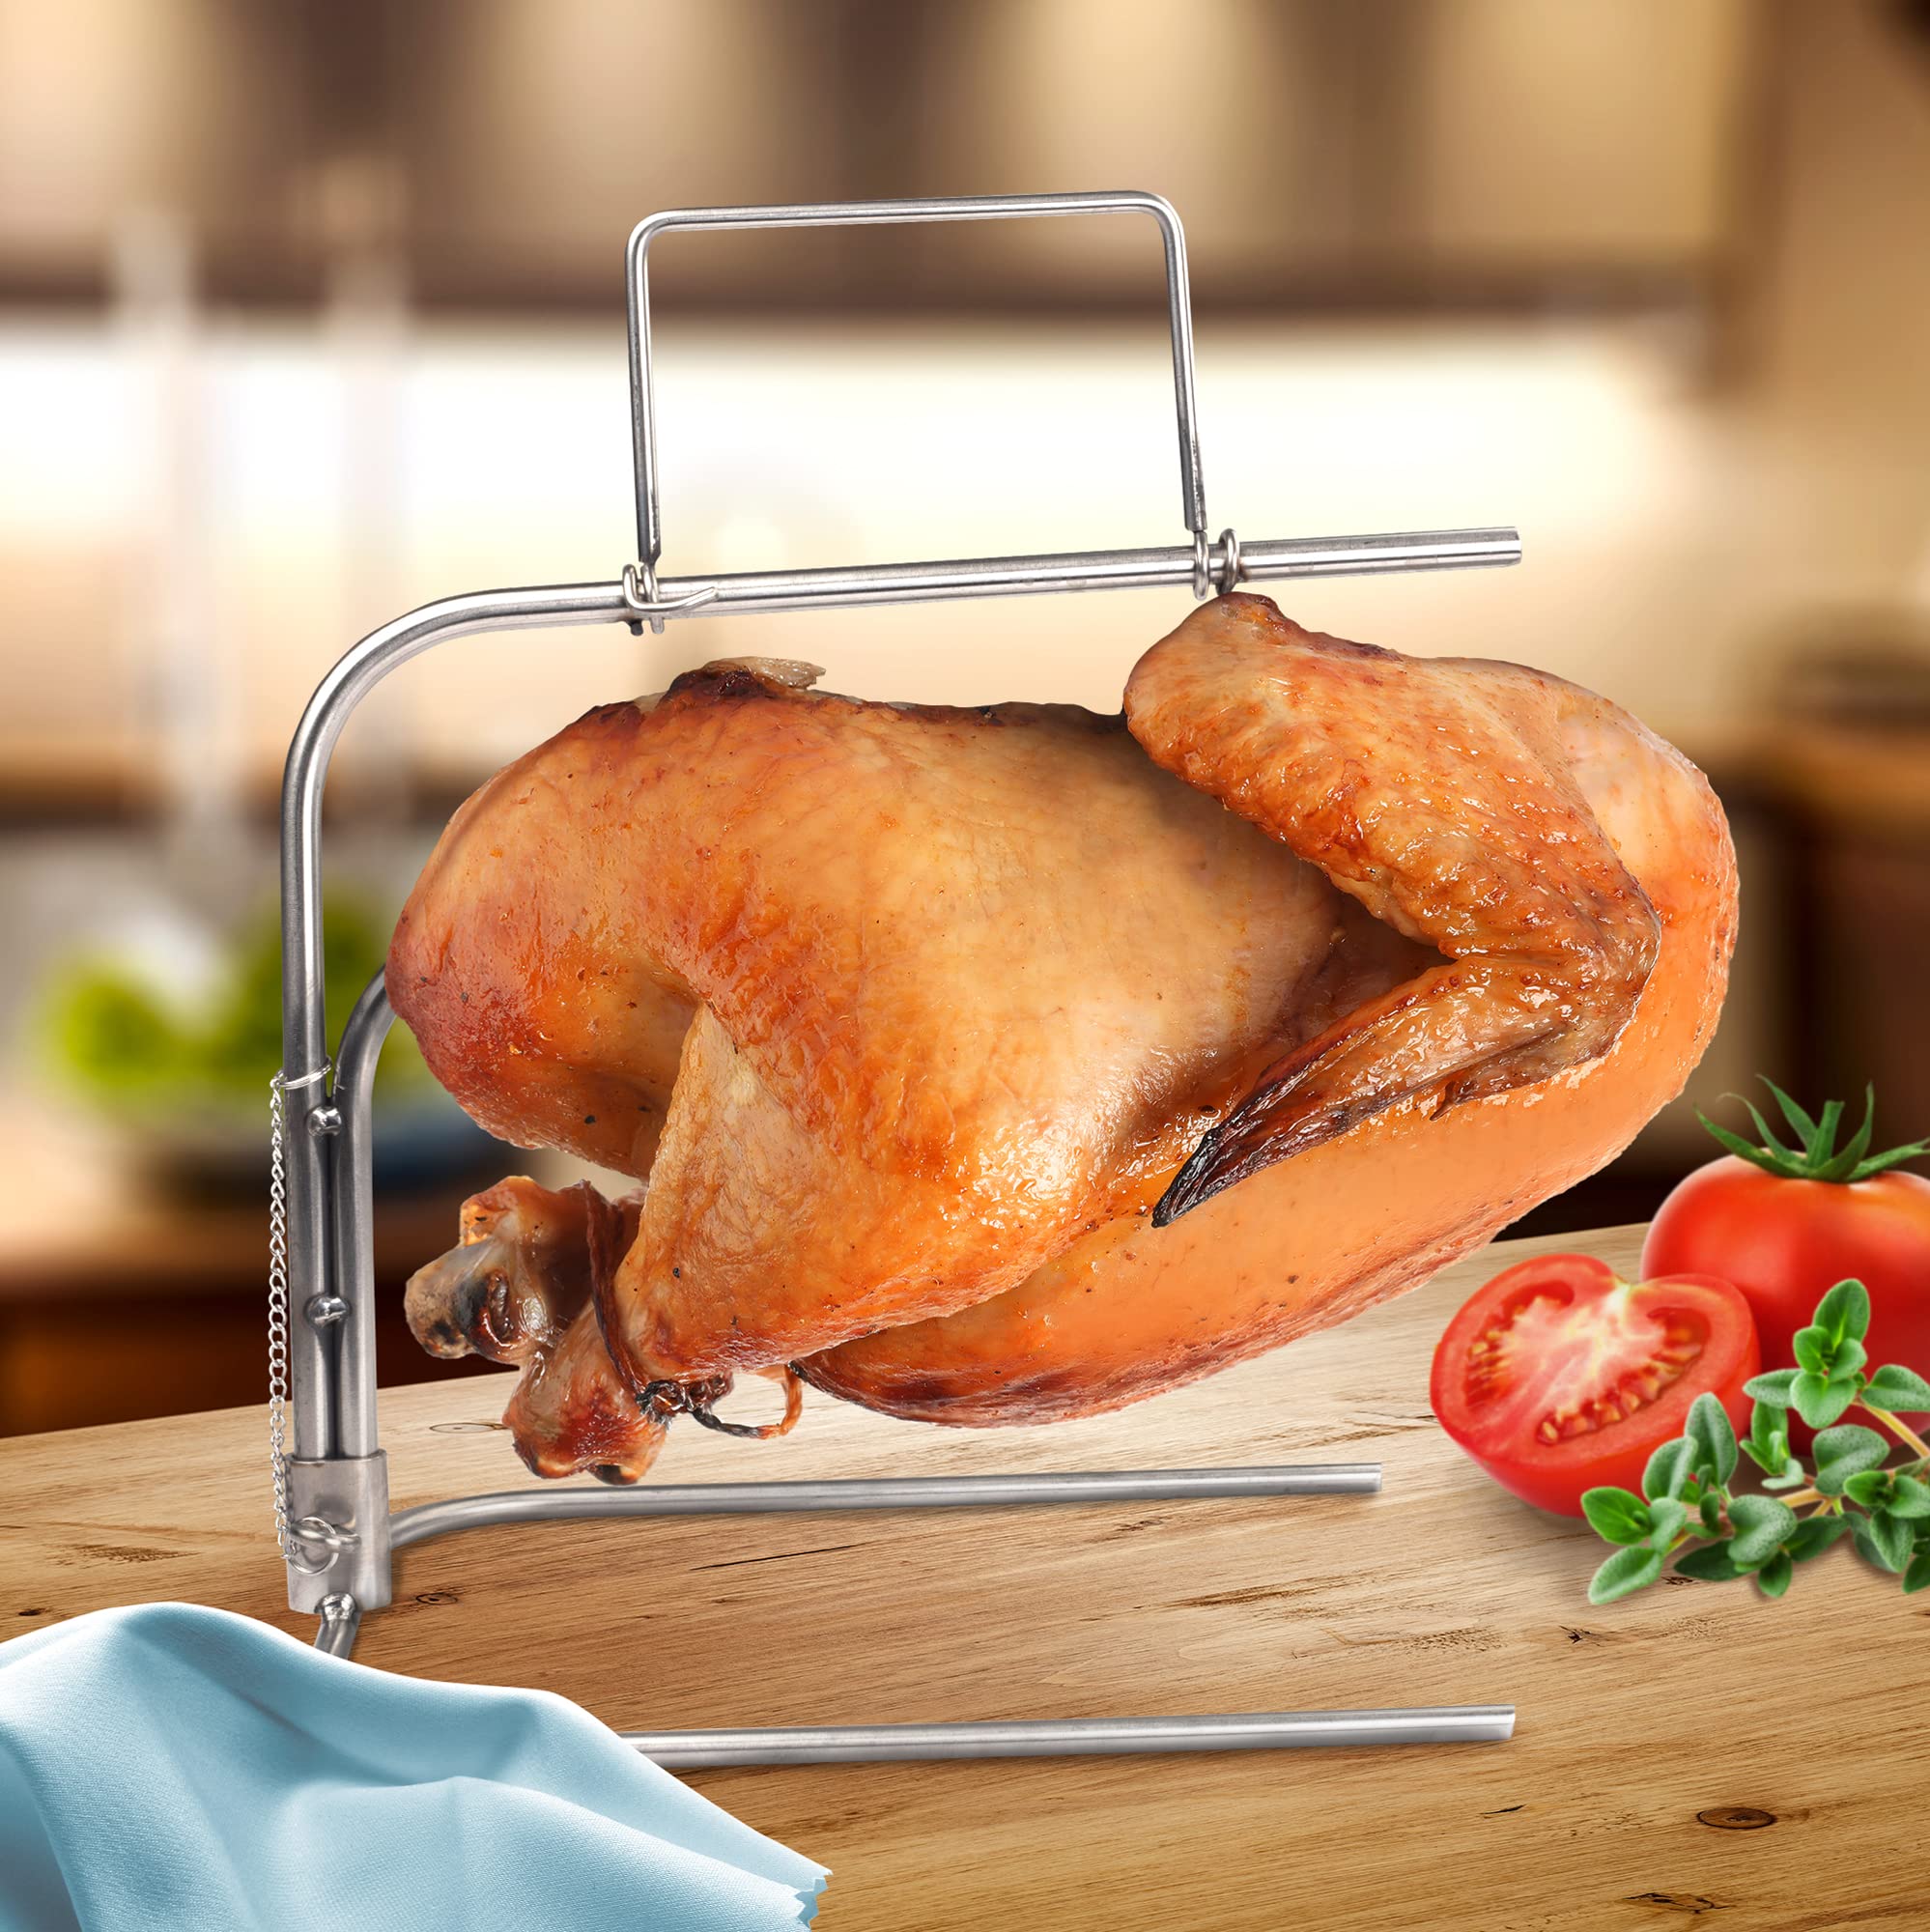 Camerons Turkey Roaster - Original Upside Down Turkey Dunrite Stainless Steel Cooker - Keeps Juices Inside Meat, Not Outside the Pan - Great for Cooking Roasts & Poultry Dinners - Barbecue Grill Gift